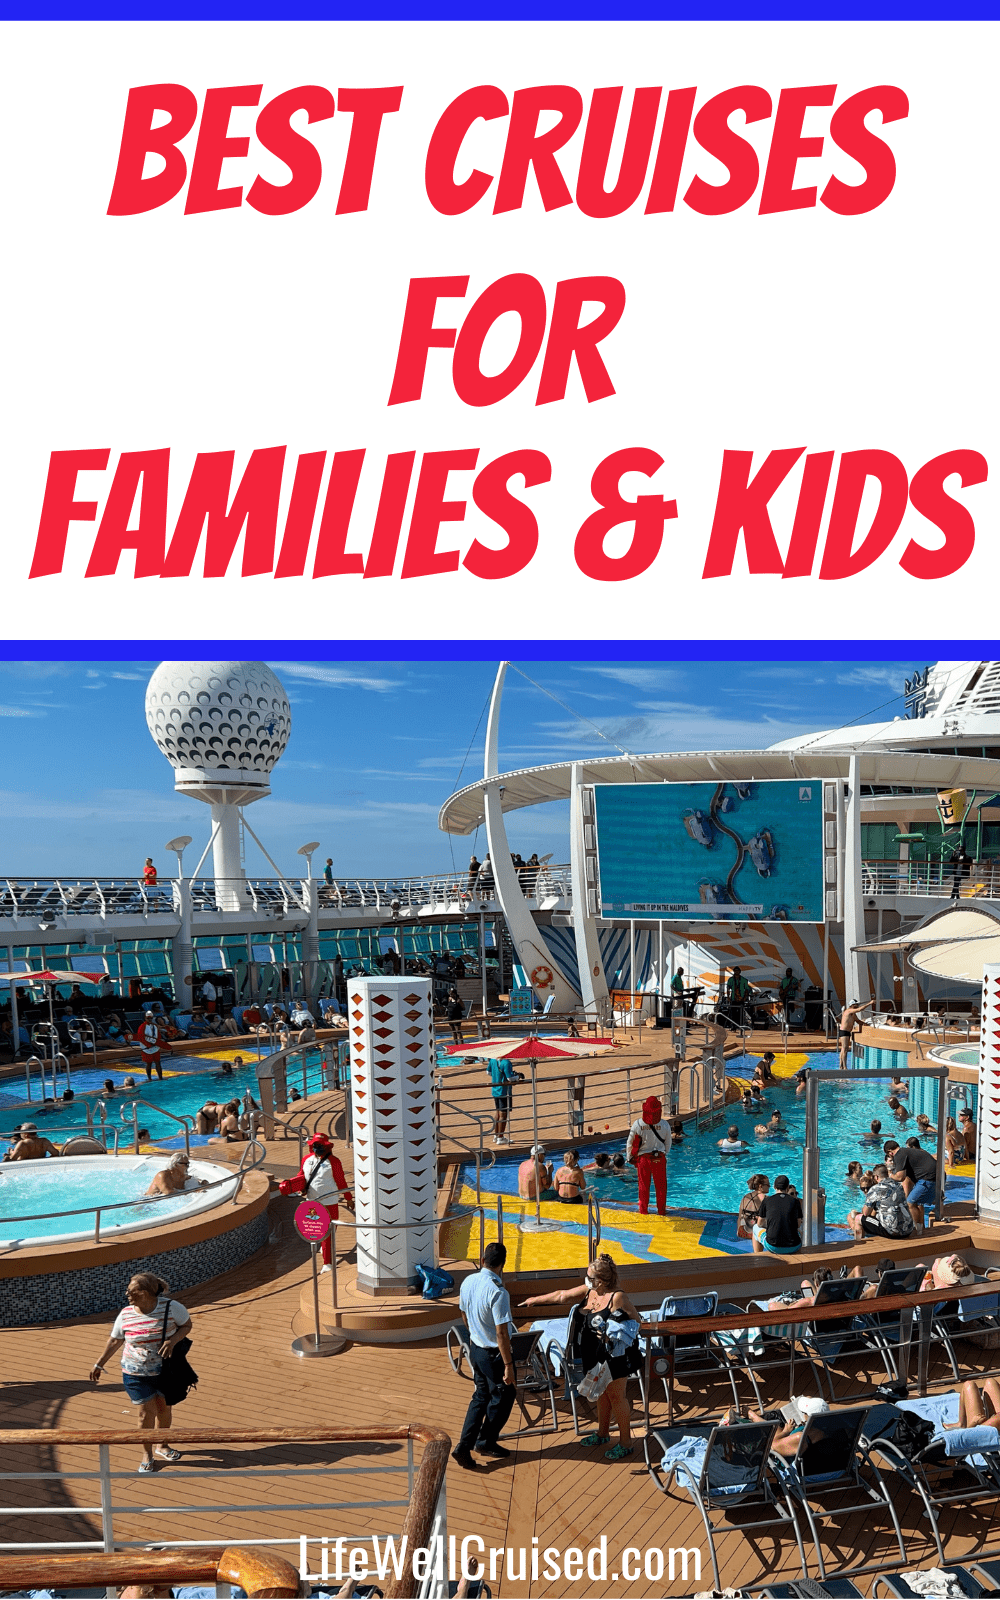 Best cruises for families & kids